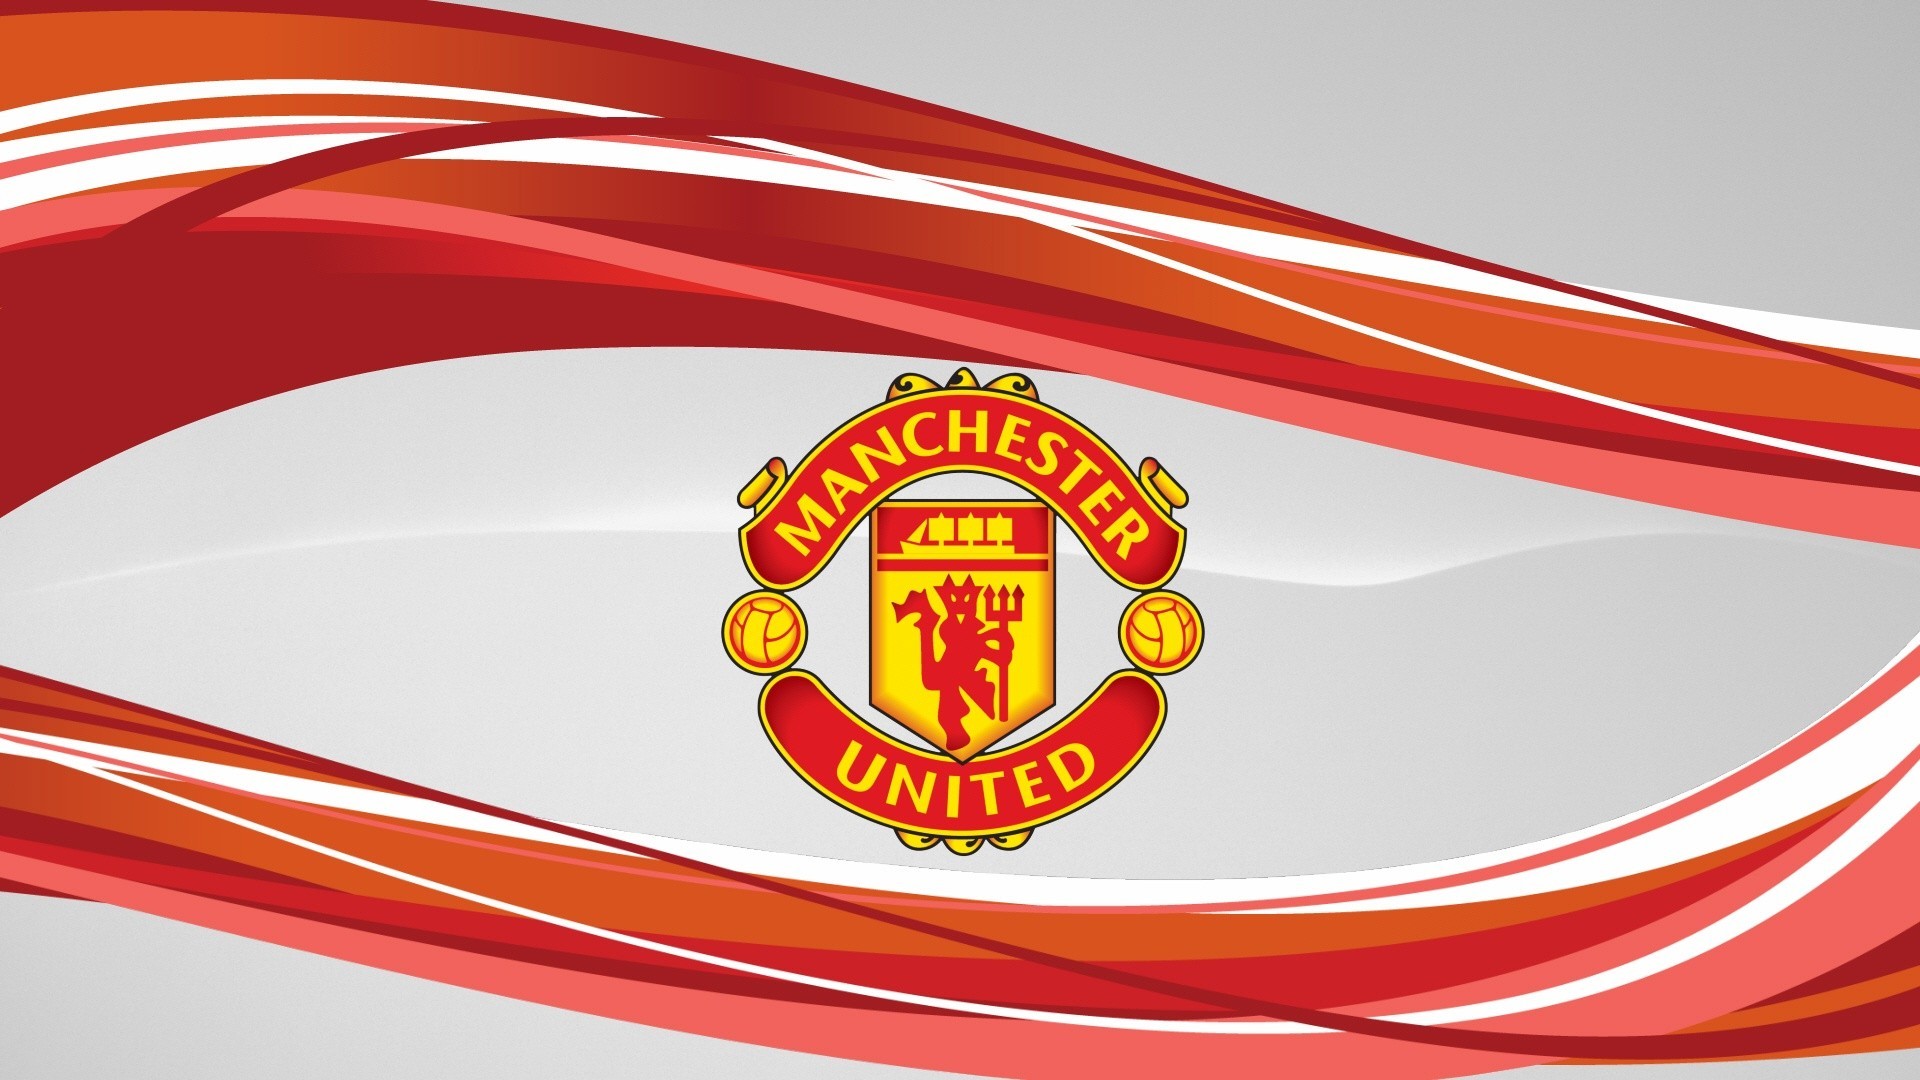 Wallpaper Desktop Manchester United HD With high-resolution 1920X1080 pixel. You can use this wallpaper for your Desktop Computers, Mac Screensavers, Windows Backgrounds, iPhone Wallpapers, Tablet or Android Lock screen and another Mobile device